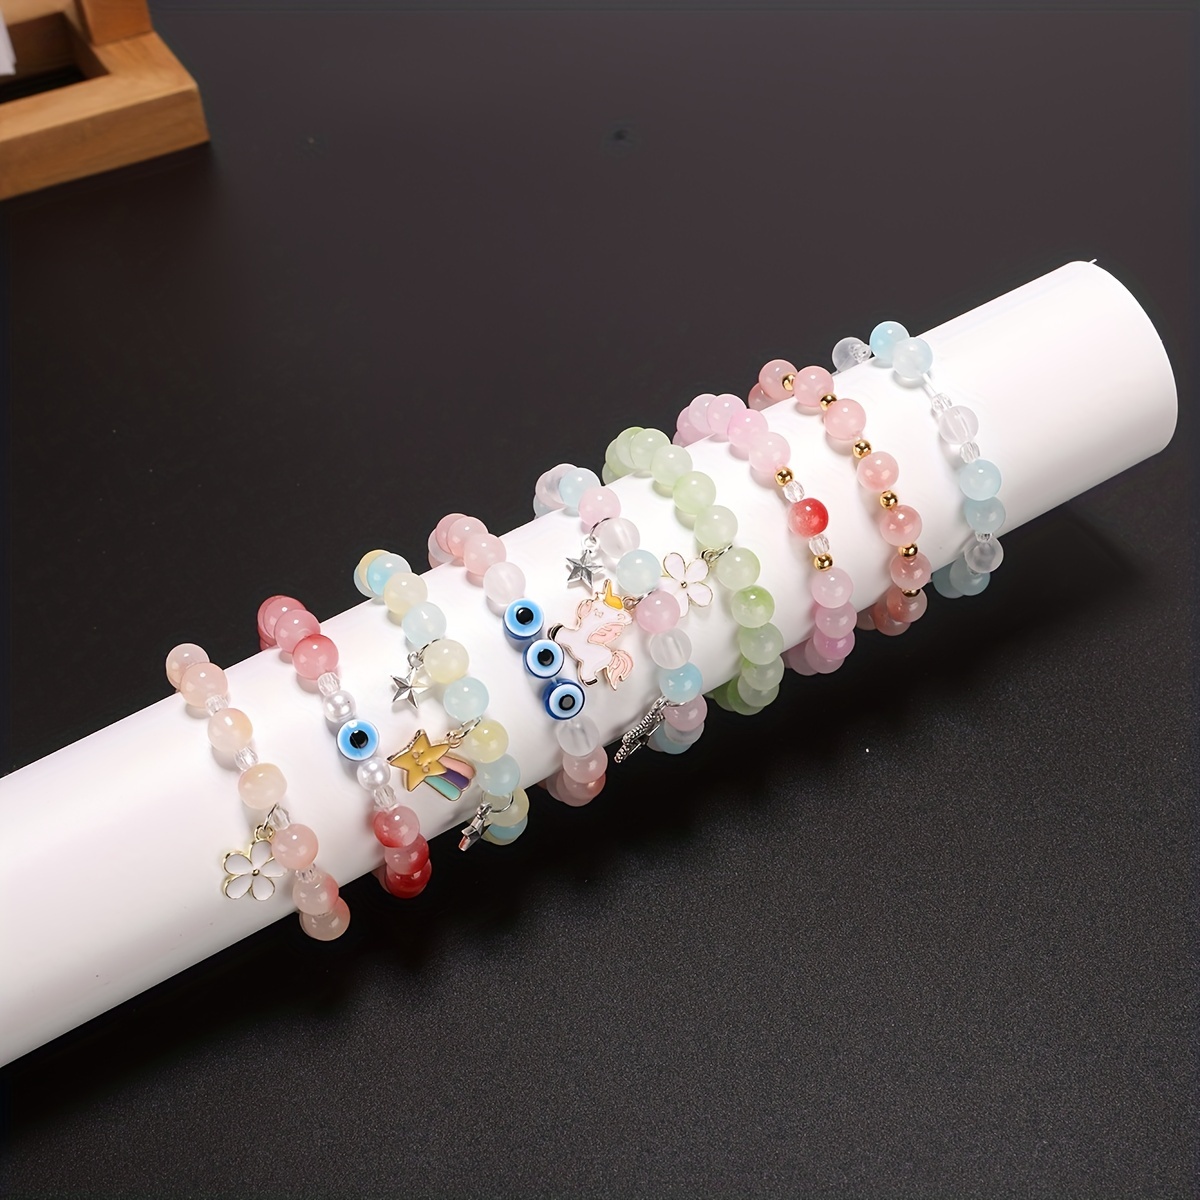 Glass Beads Bracelet Making Kit for Young Girls Women Adult,Two-color  Transparent Gradient Glass Beads Unicorn,Jewelry Making Kit for Girl Gift